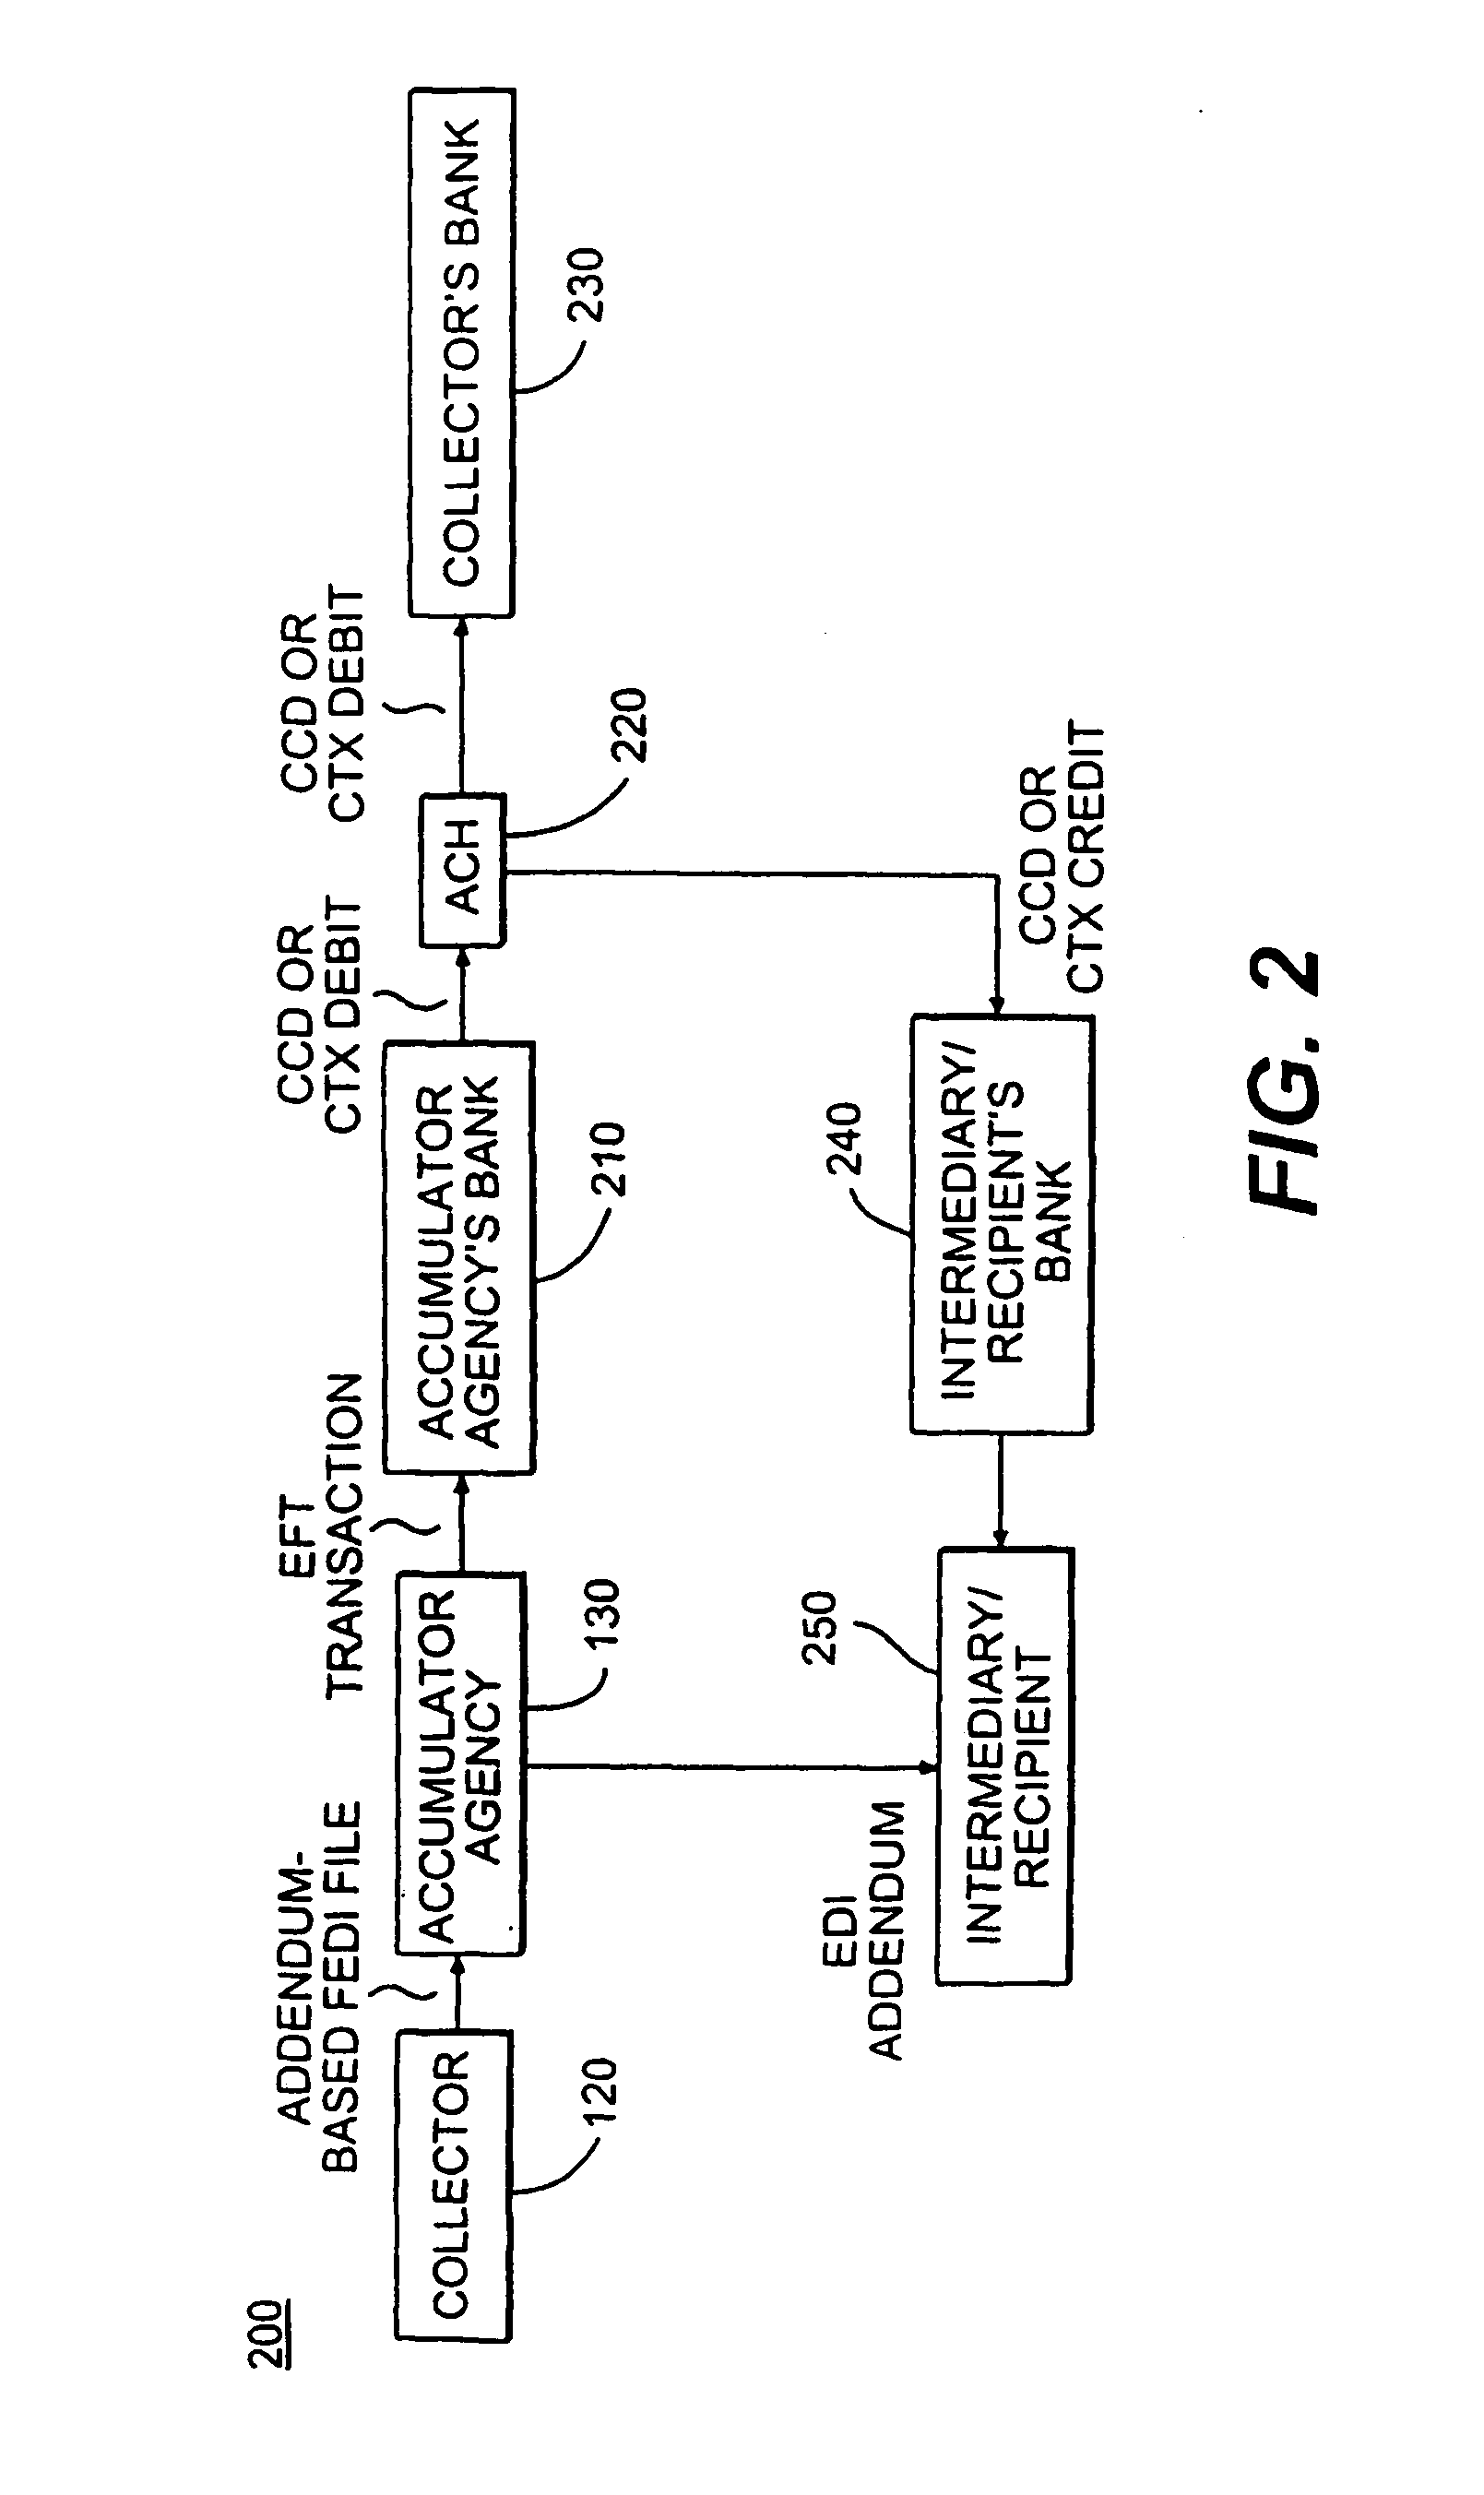 Method and apparatus for payment processing using debit-based electronic funds transfer and disbursement processing using addendum-based electronic data interchange